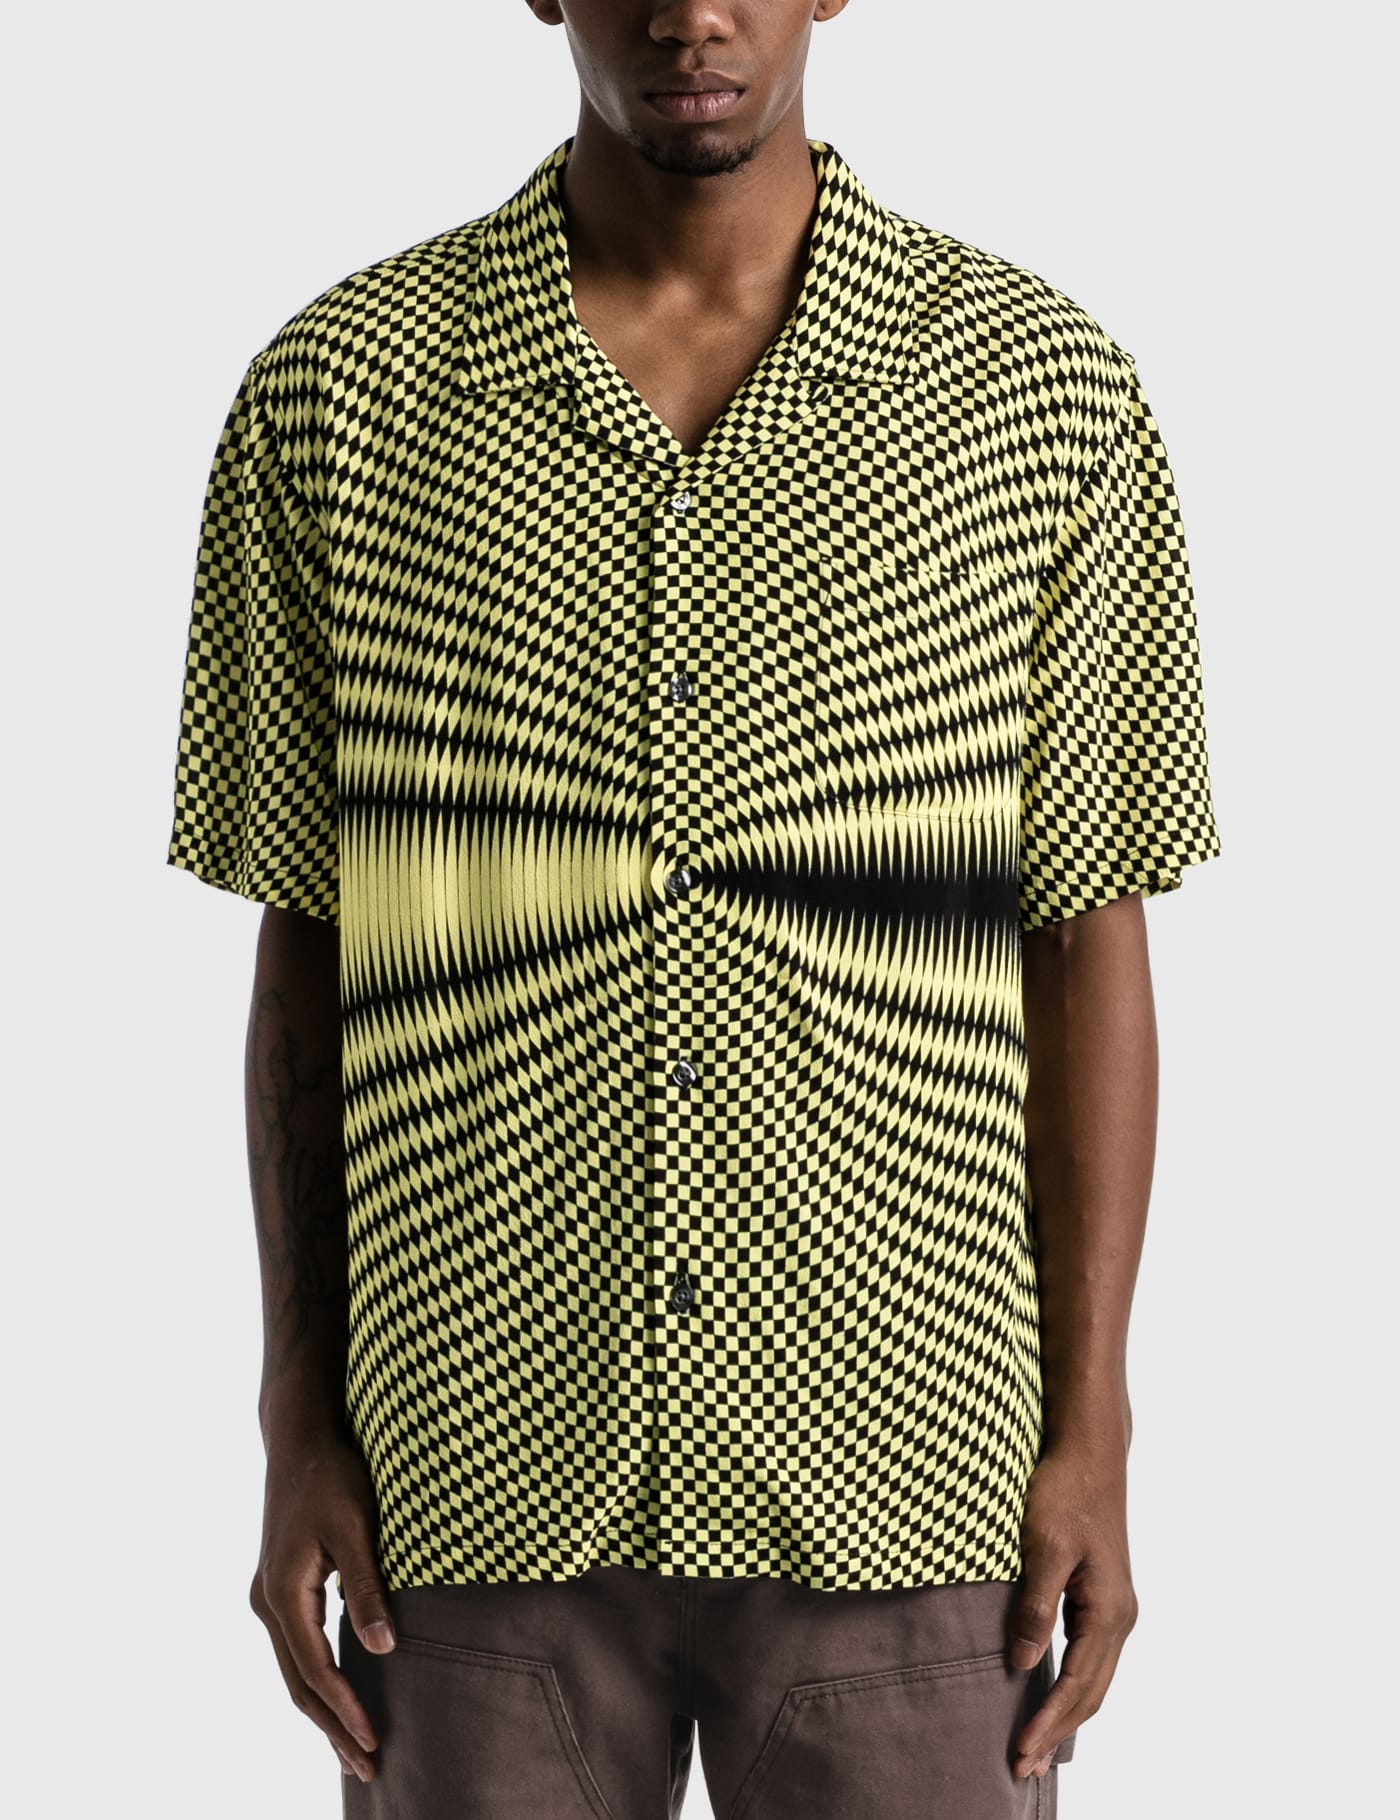 Stüssy - Psychedelic Check Shirt | HBX - Globally Curated Fashion 